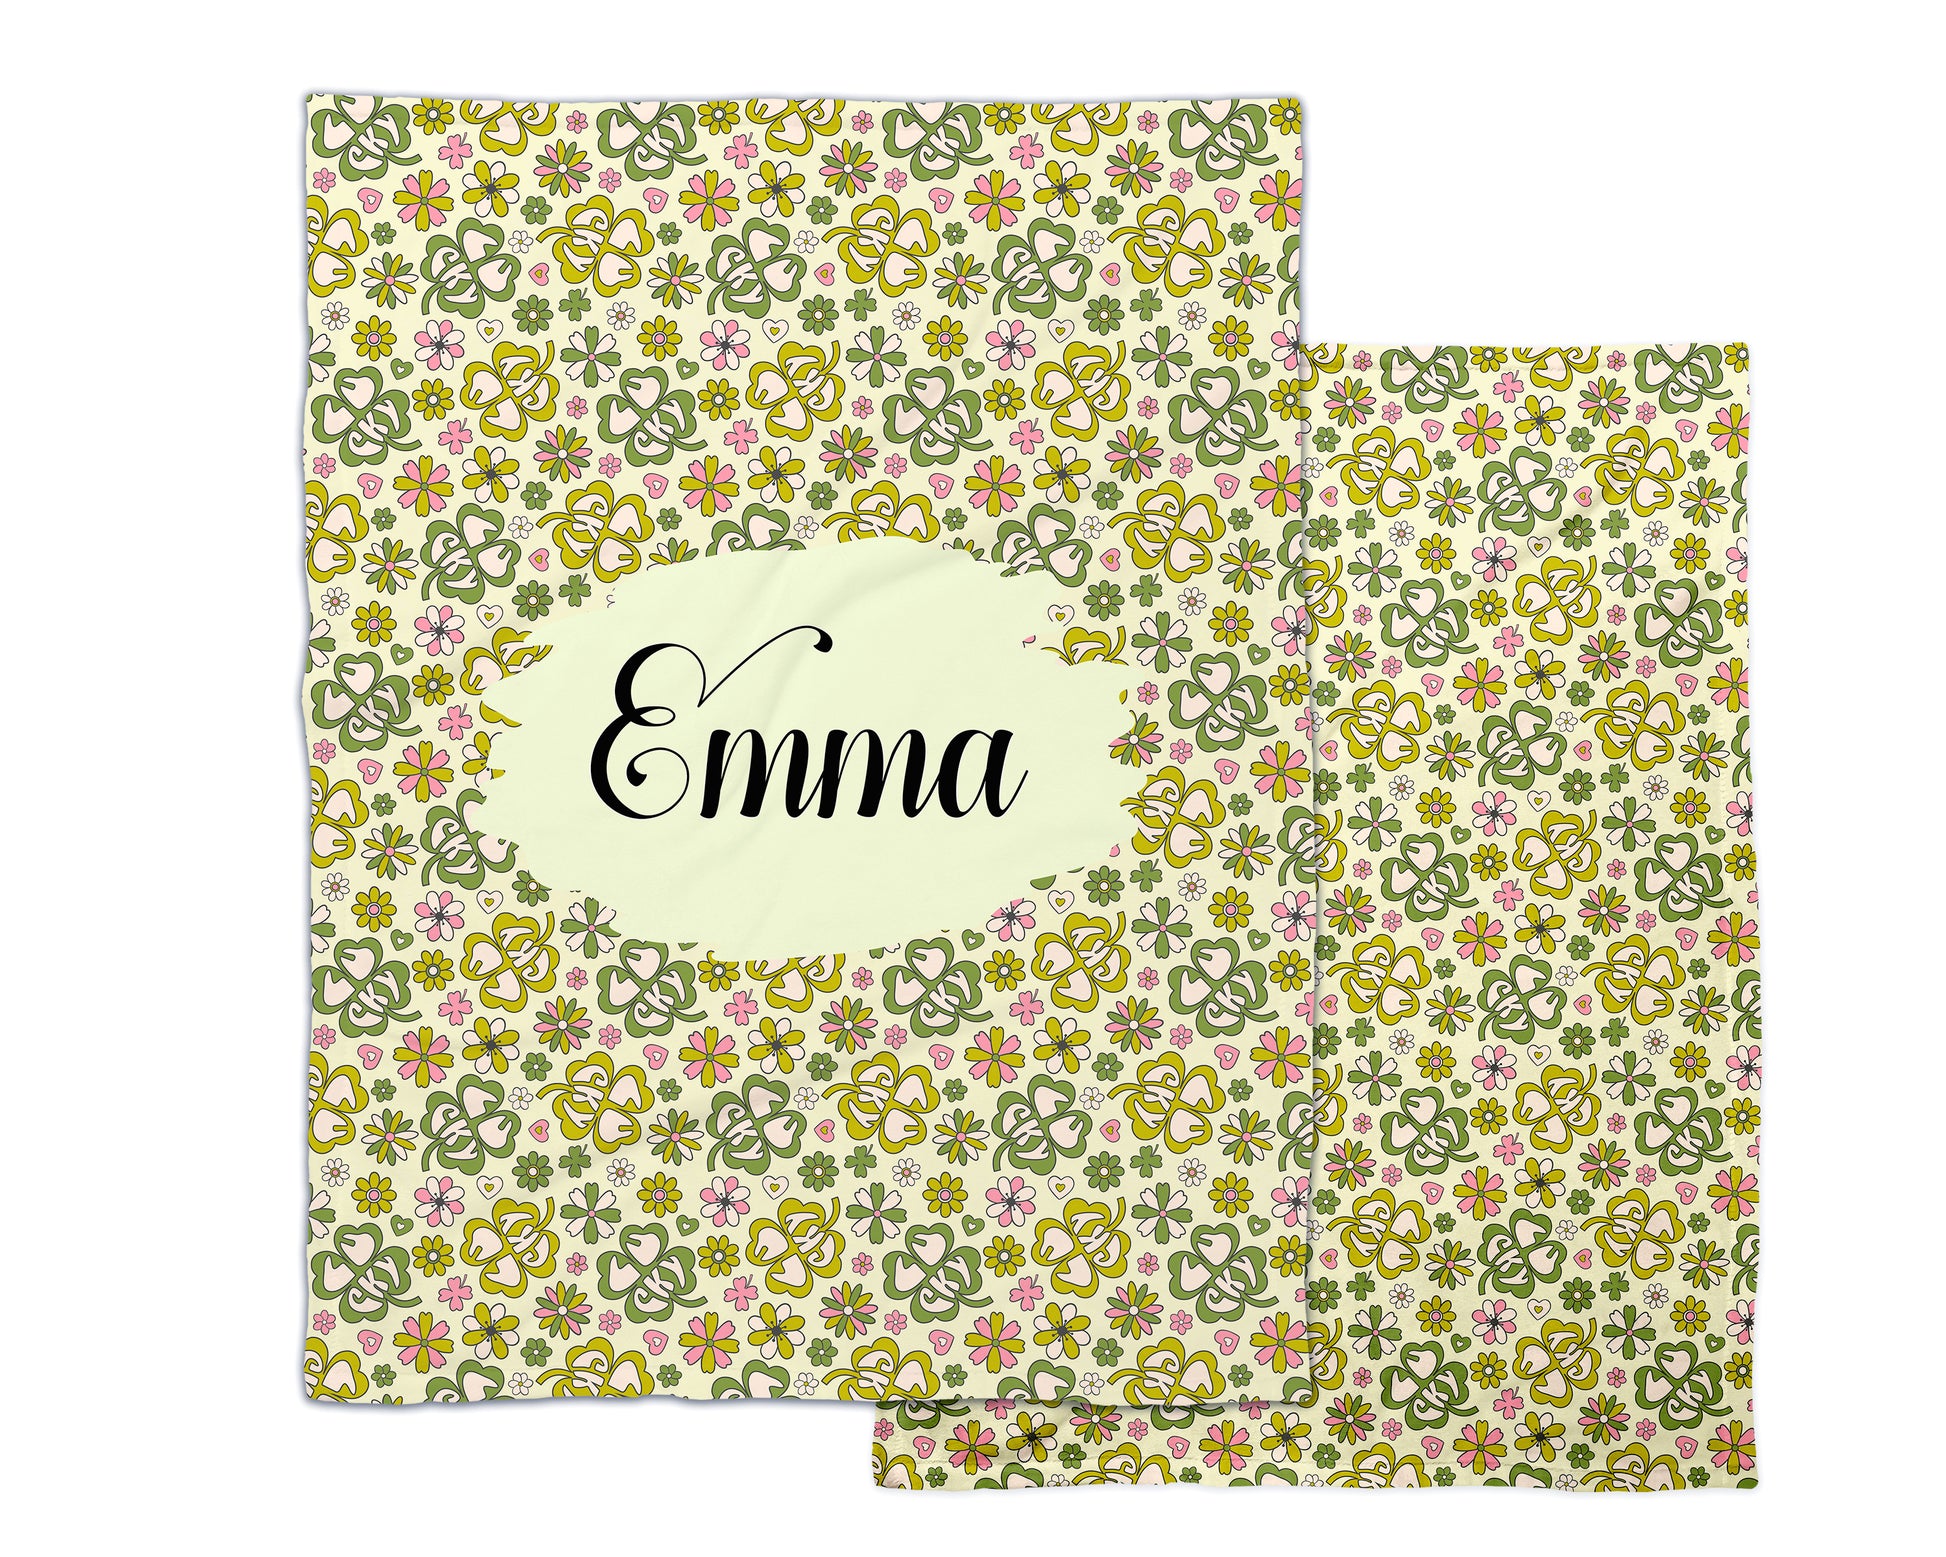 Camila Prints St Patrick's Day patterned fleece blankets with customizable name.